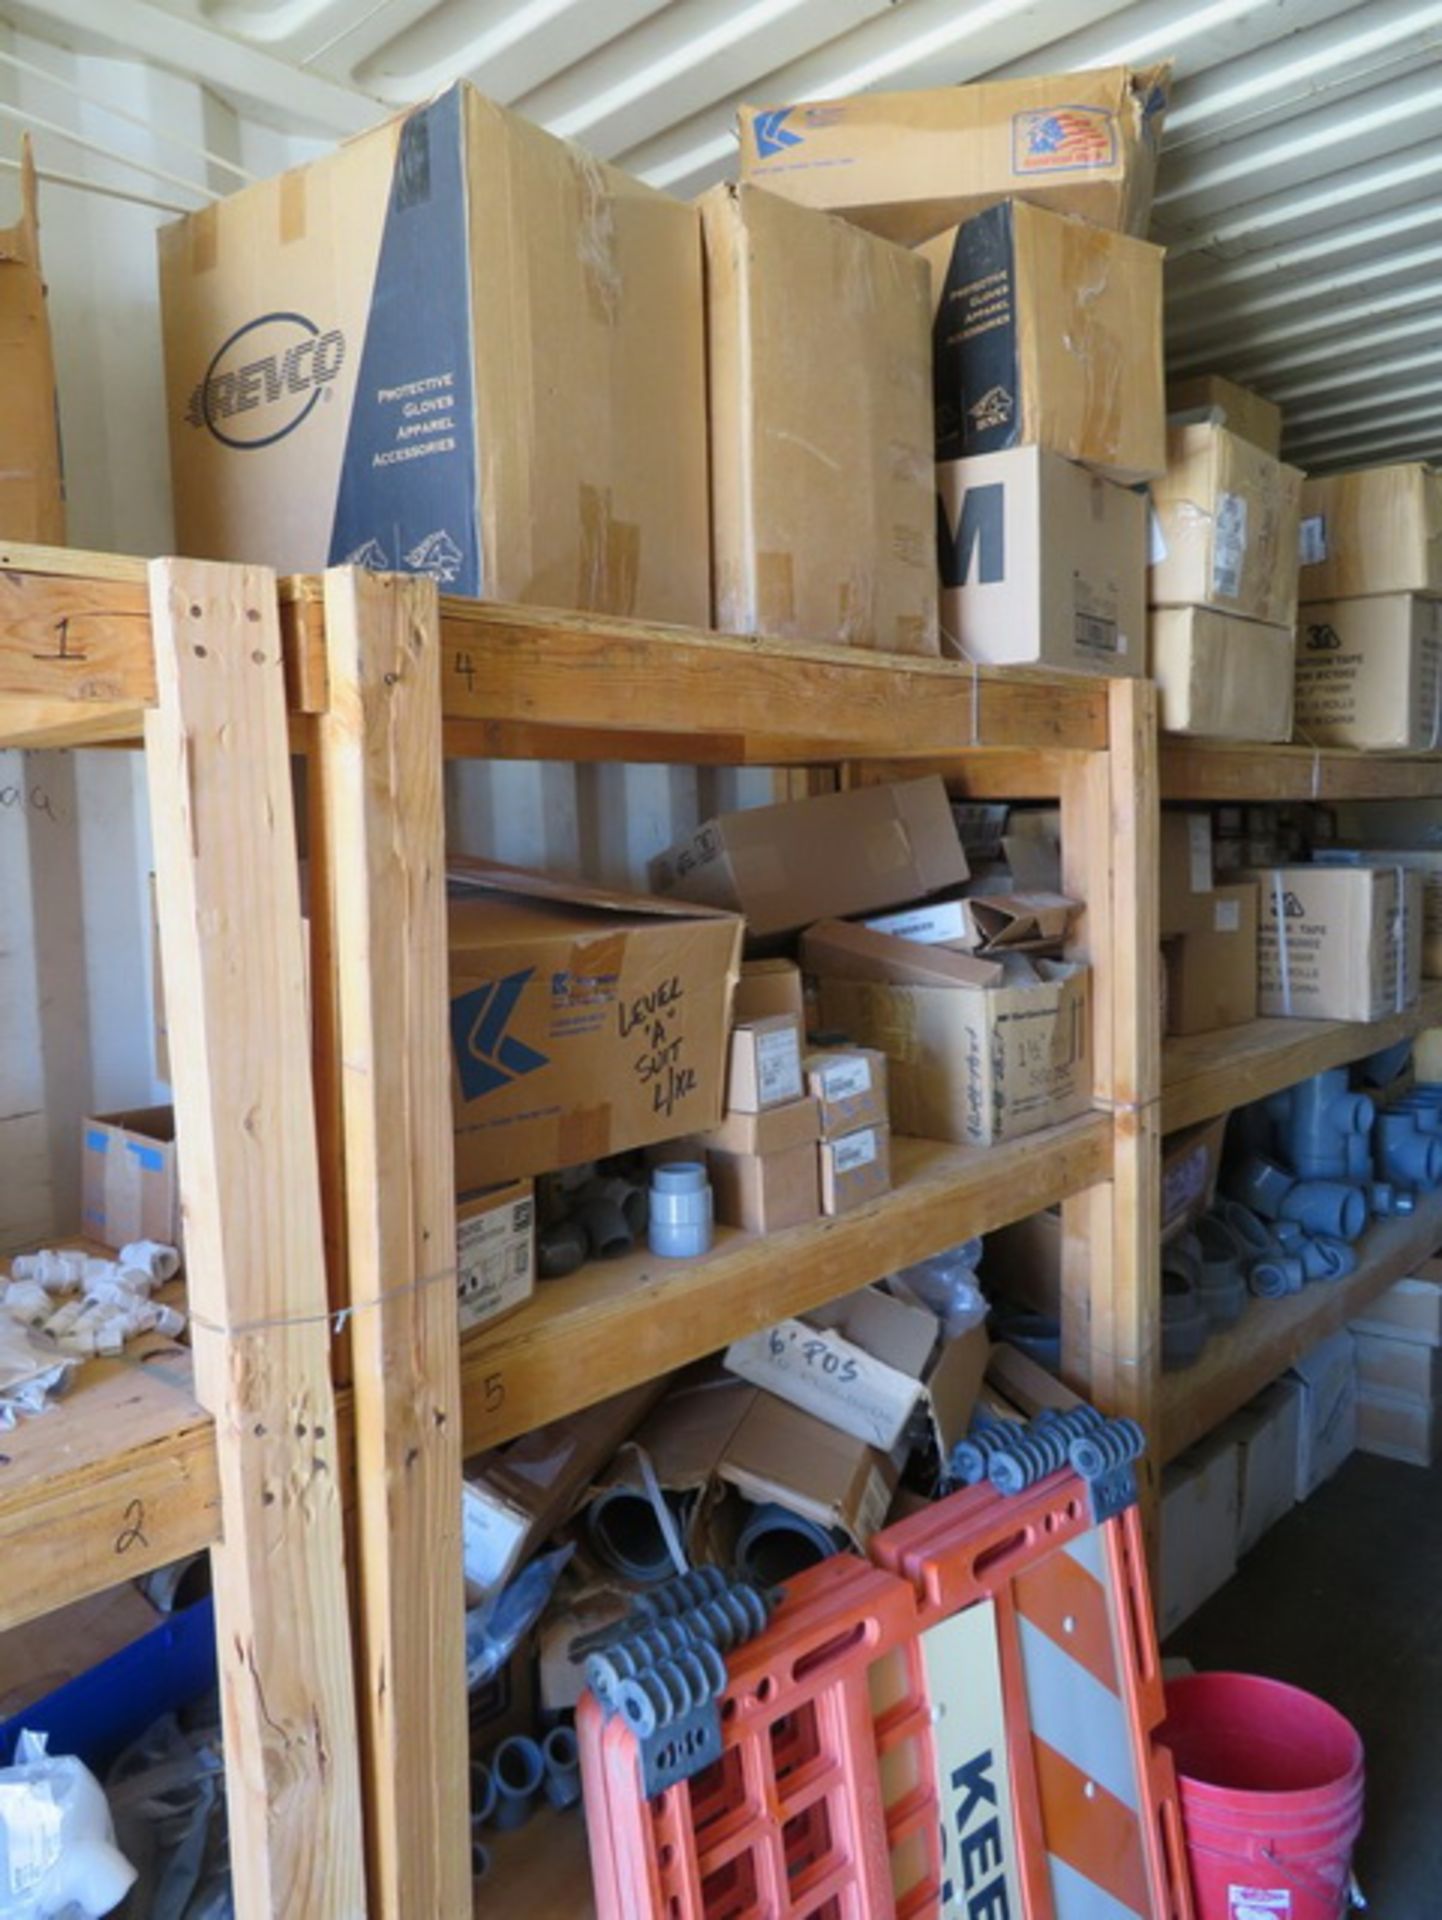 Remaining Contents of Shipping Container. To Include PVC Pipe Fittings, PVC Ball Valves CWC 3/8" - Image 55 of 61